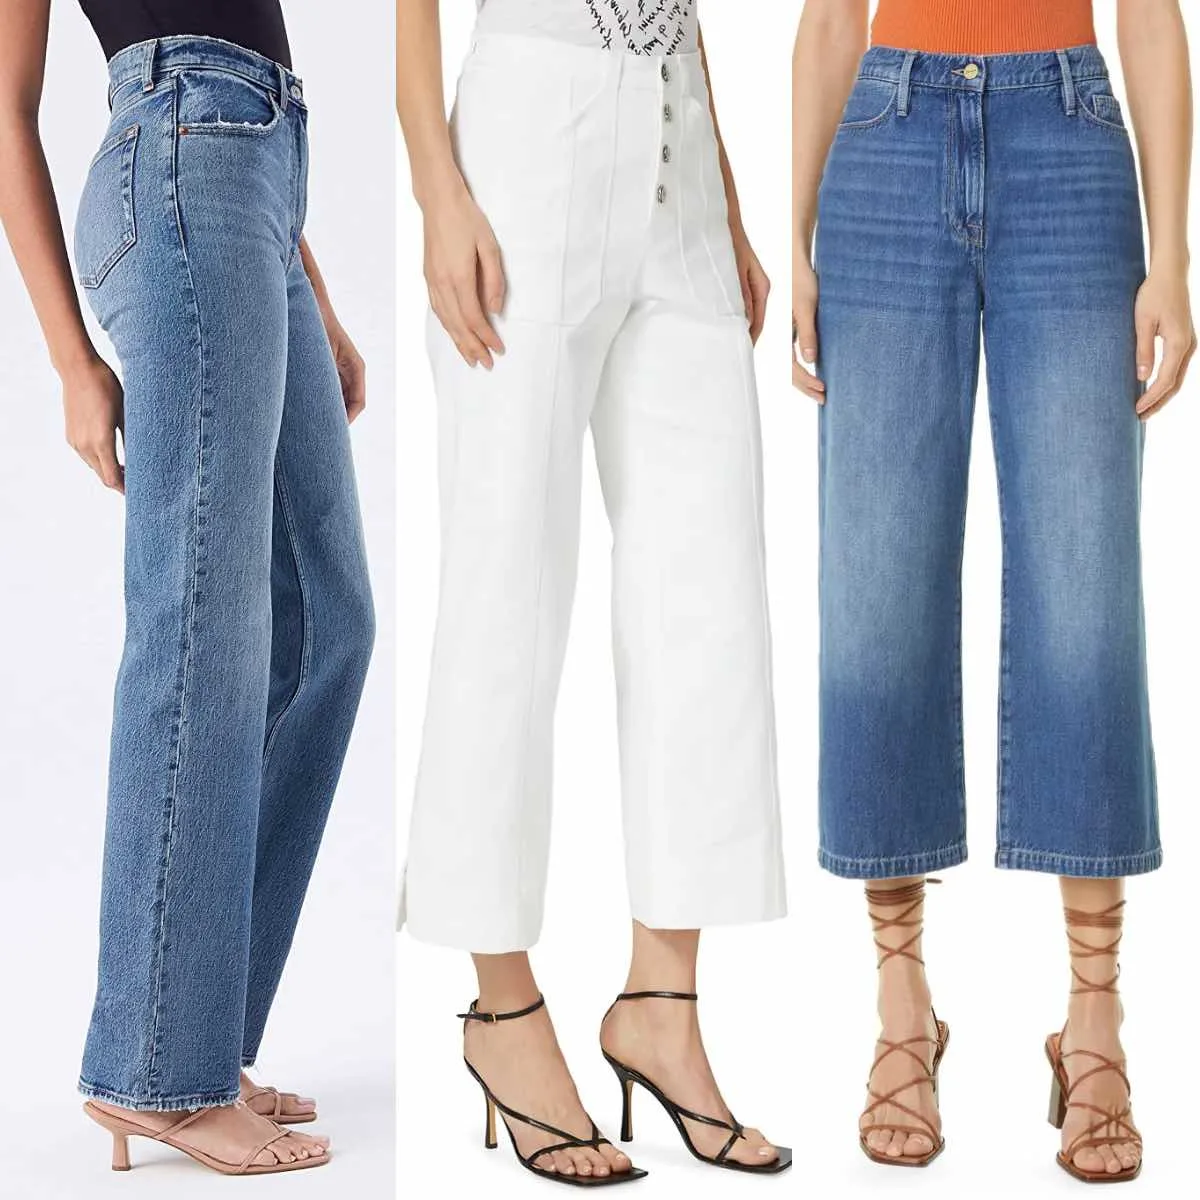 3 women wearing different strappy sandals shoes with wide leg jeans.